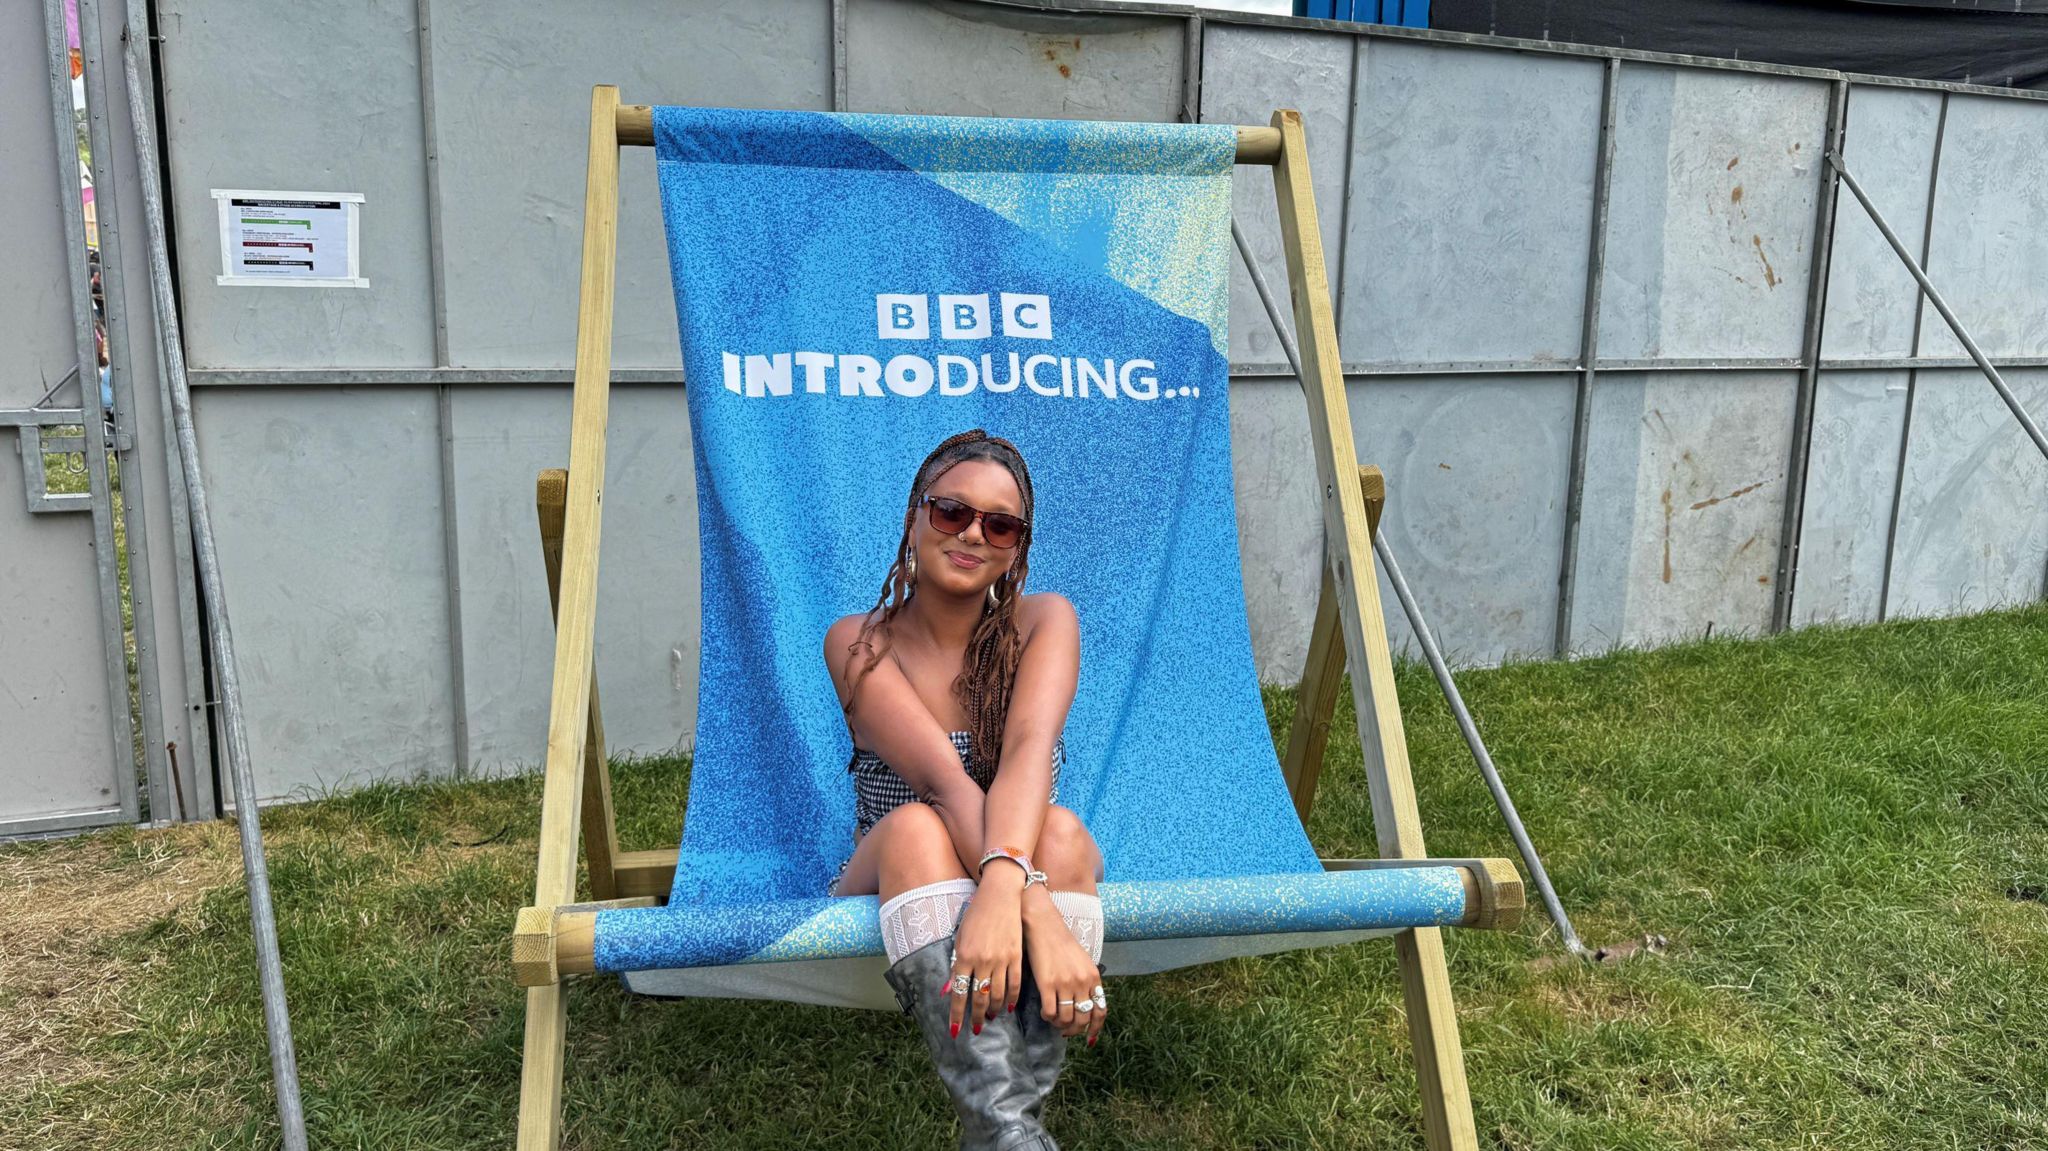 Tianna sitting in a blue BBC Introducing deck chair